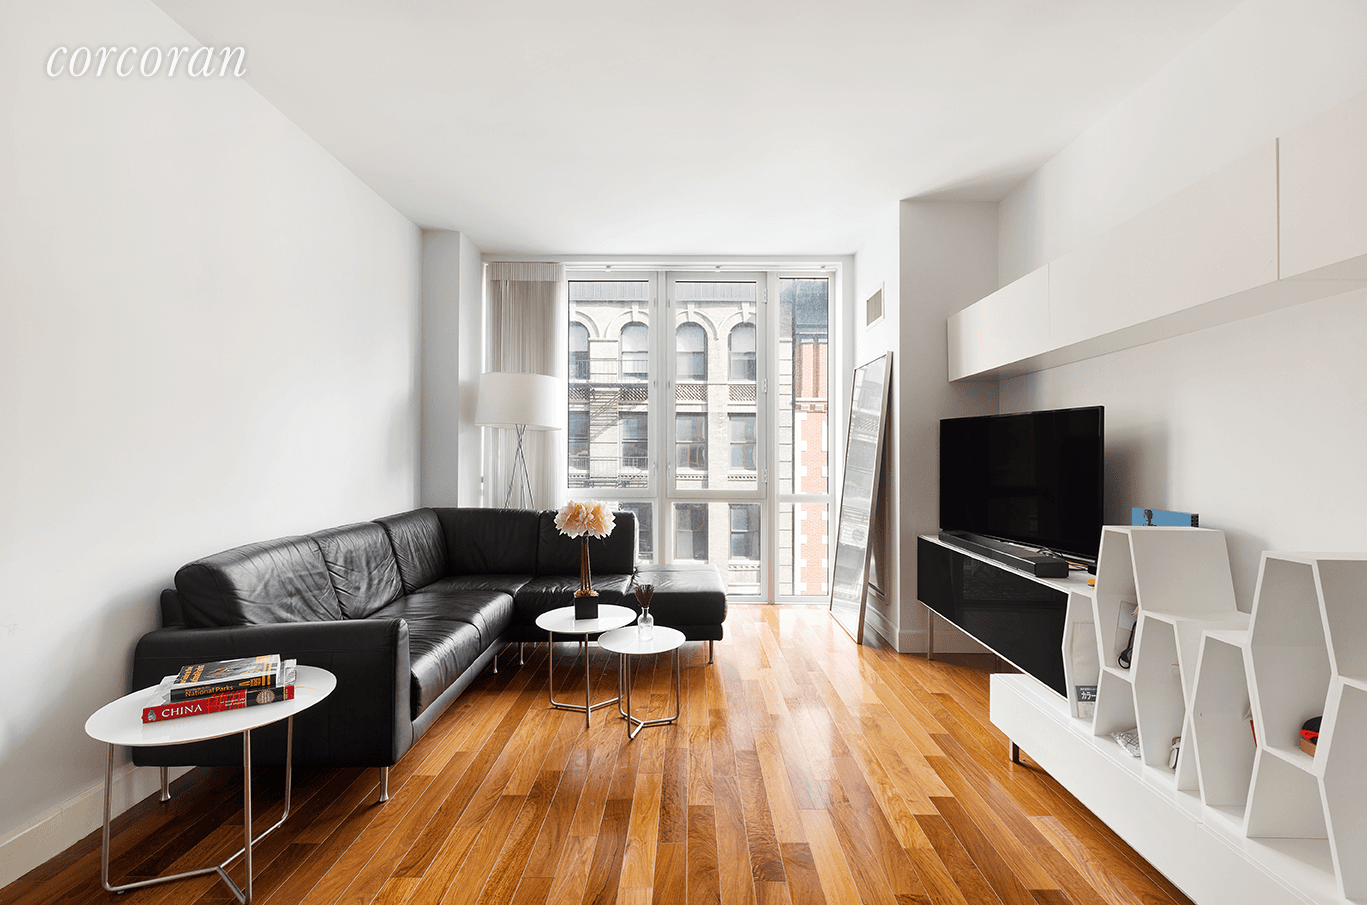 Located in the artistic and cosmopolitan Chelsea, enjoy this luxurious 1 bedroom 1 bathroom apartment situated minutes from some of the trendiest restaurants, shops, and galleries.